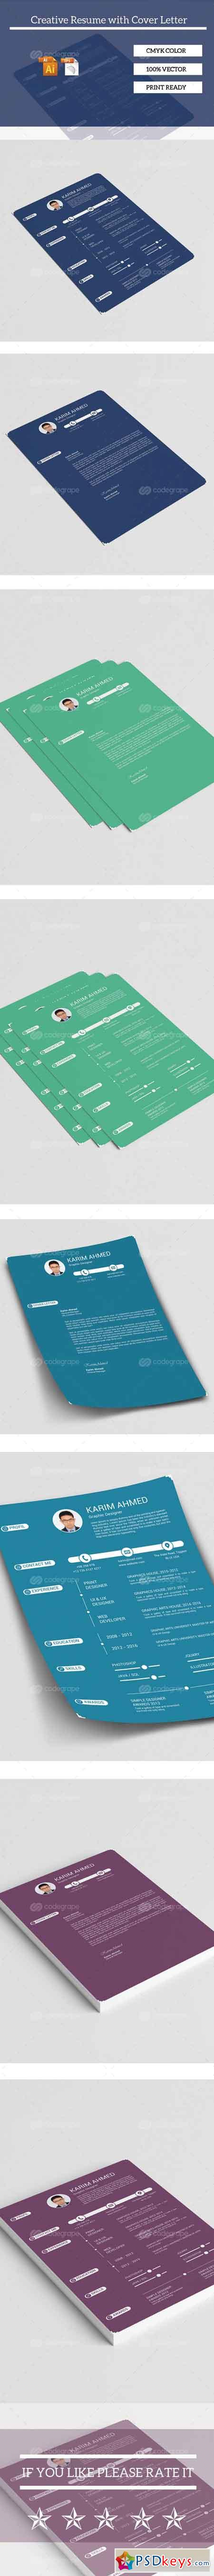 Creative Resume With Cover Letter 6329